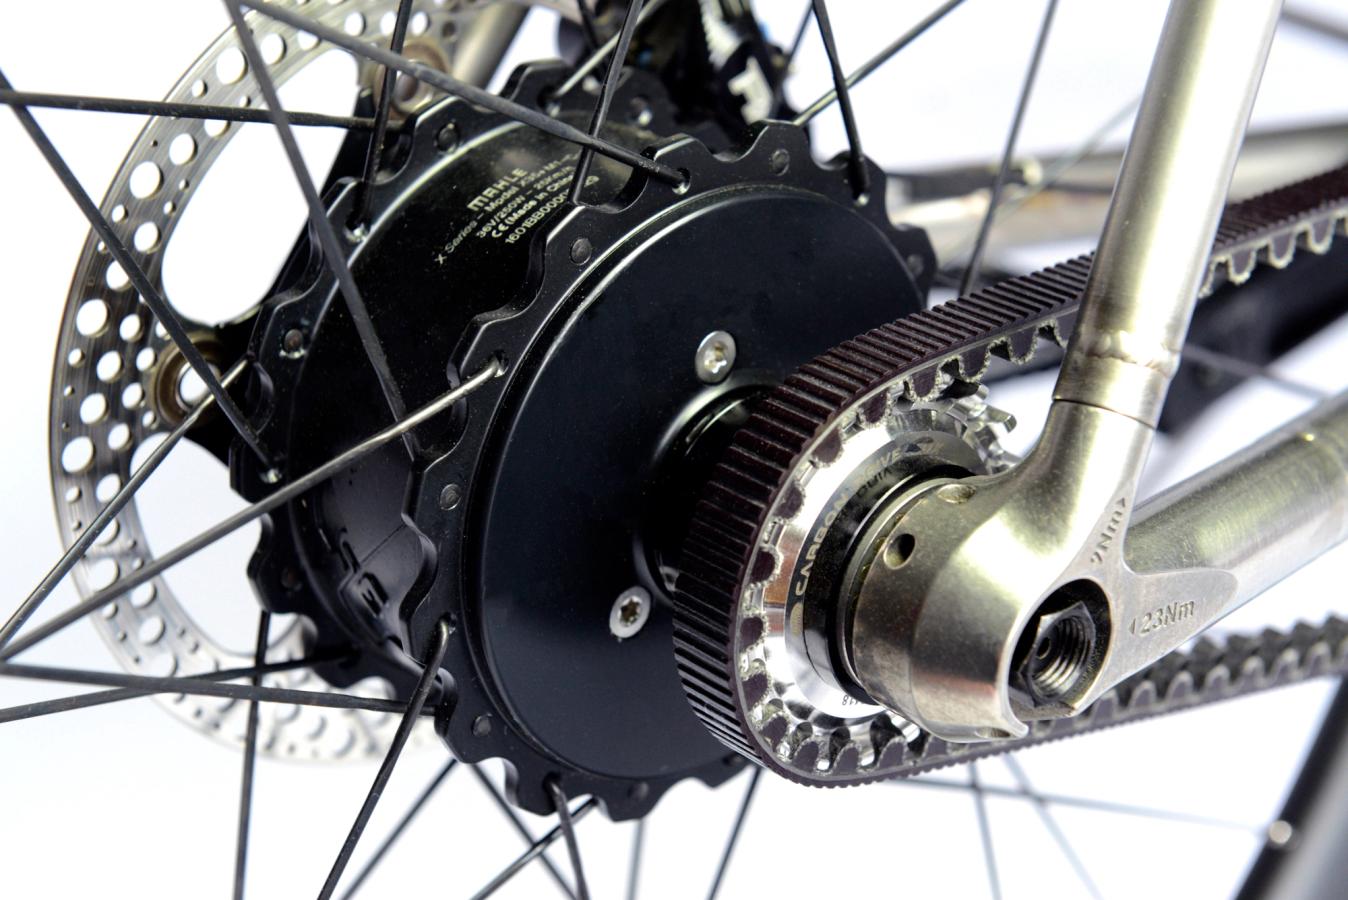 Both Mahle's X20 and X35+ systems use an integrated battery that sits in the downtube and a rear hub motor